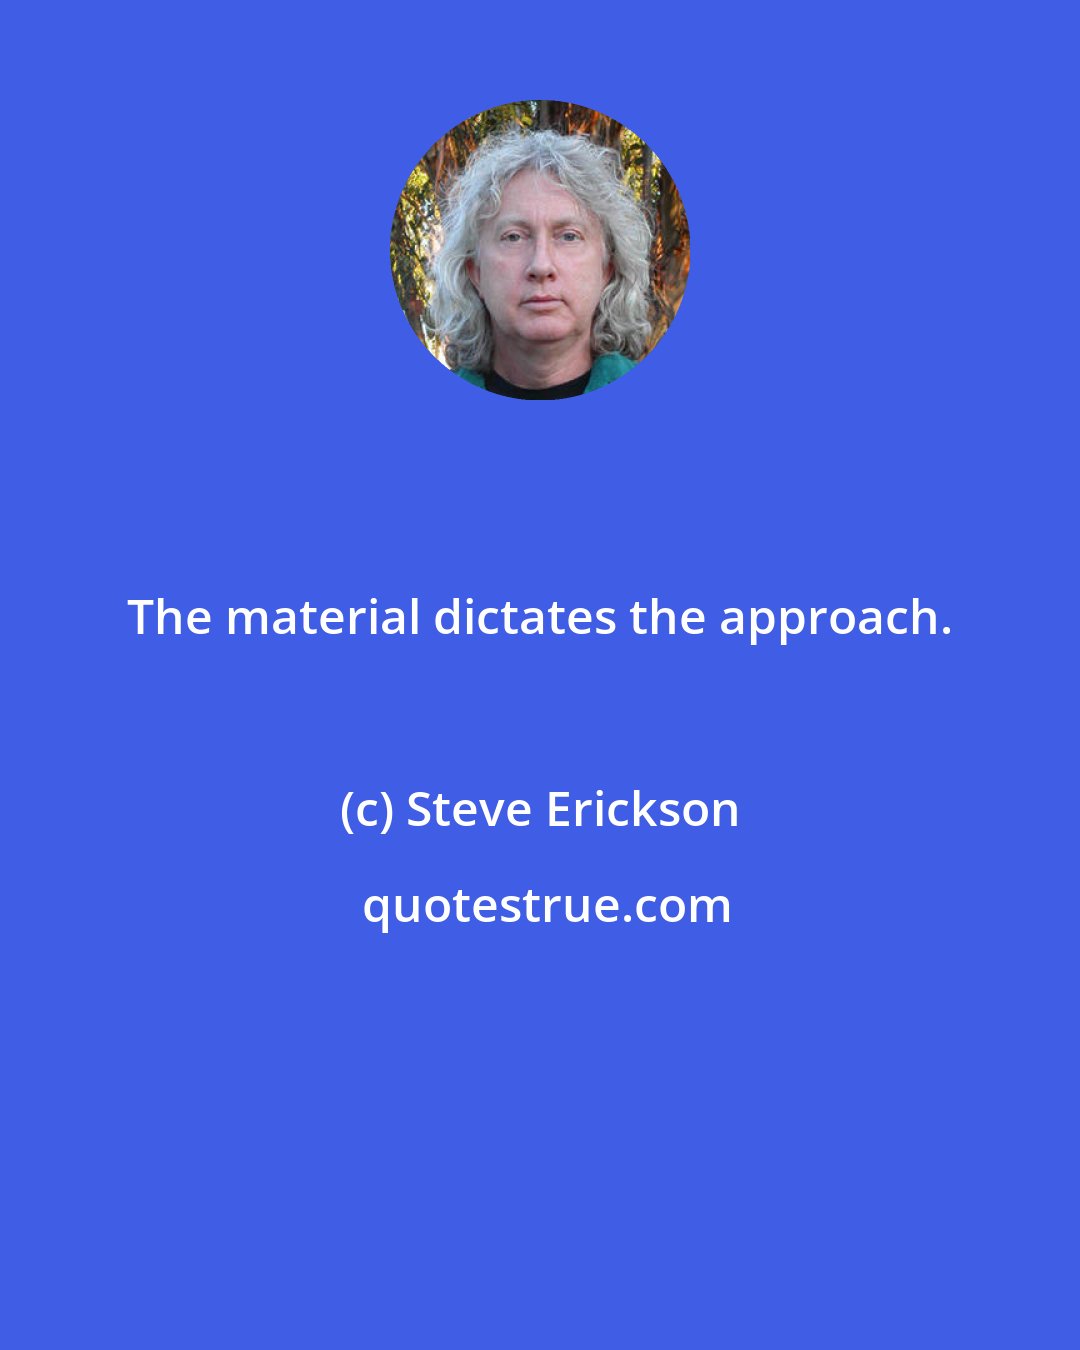 Steve Erickson: The material dictates the approach.